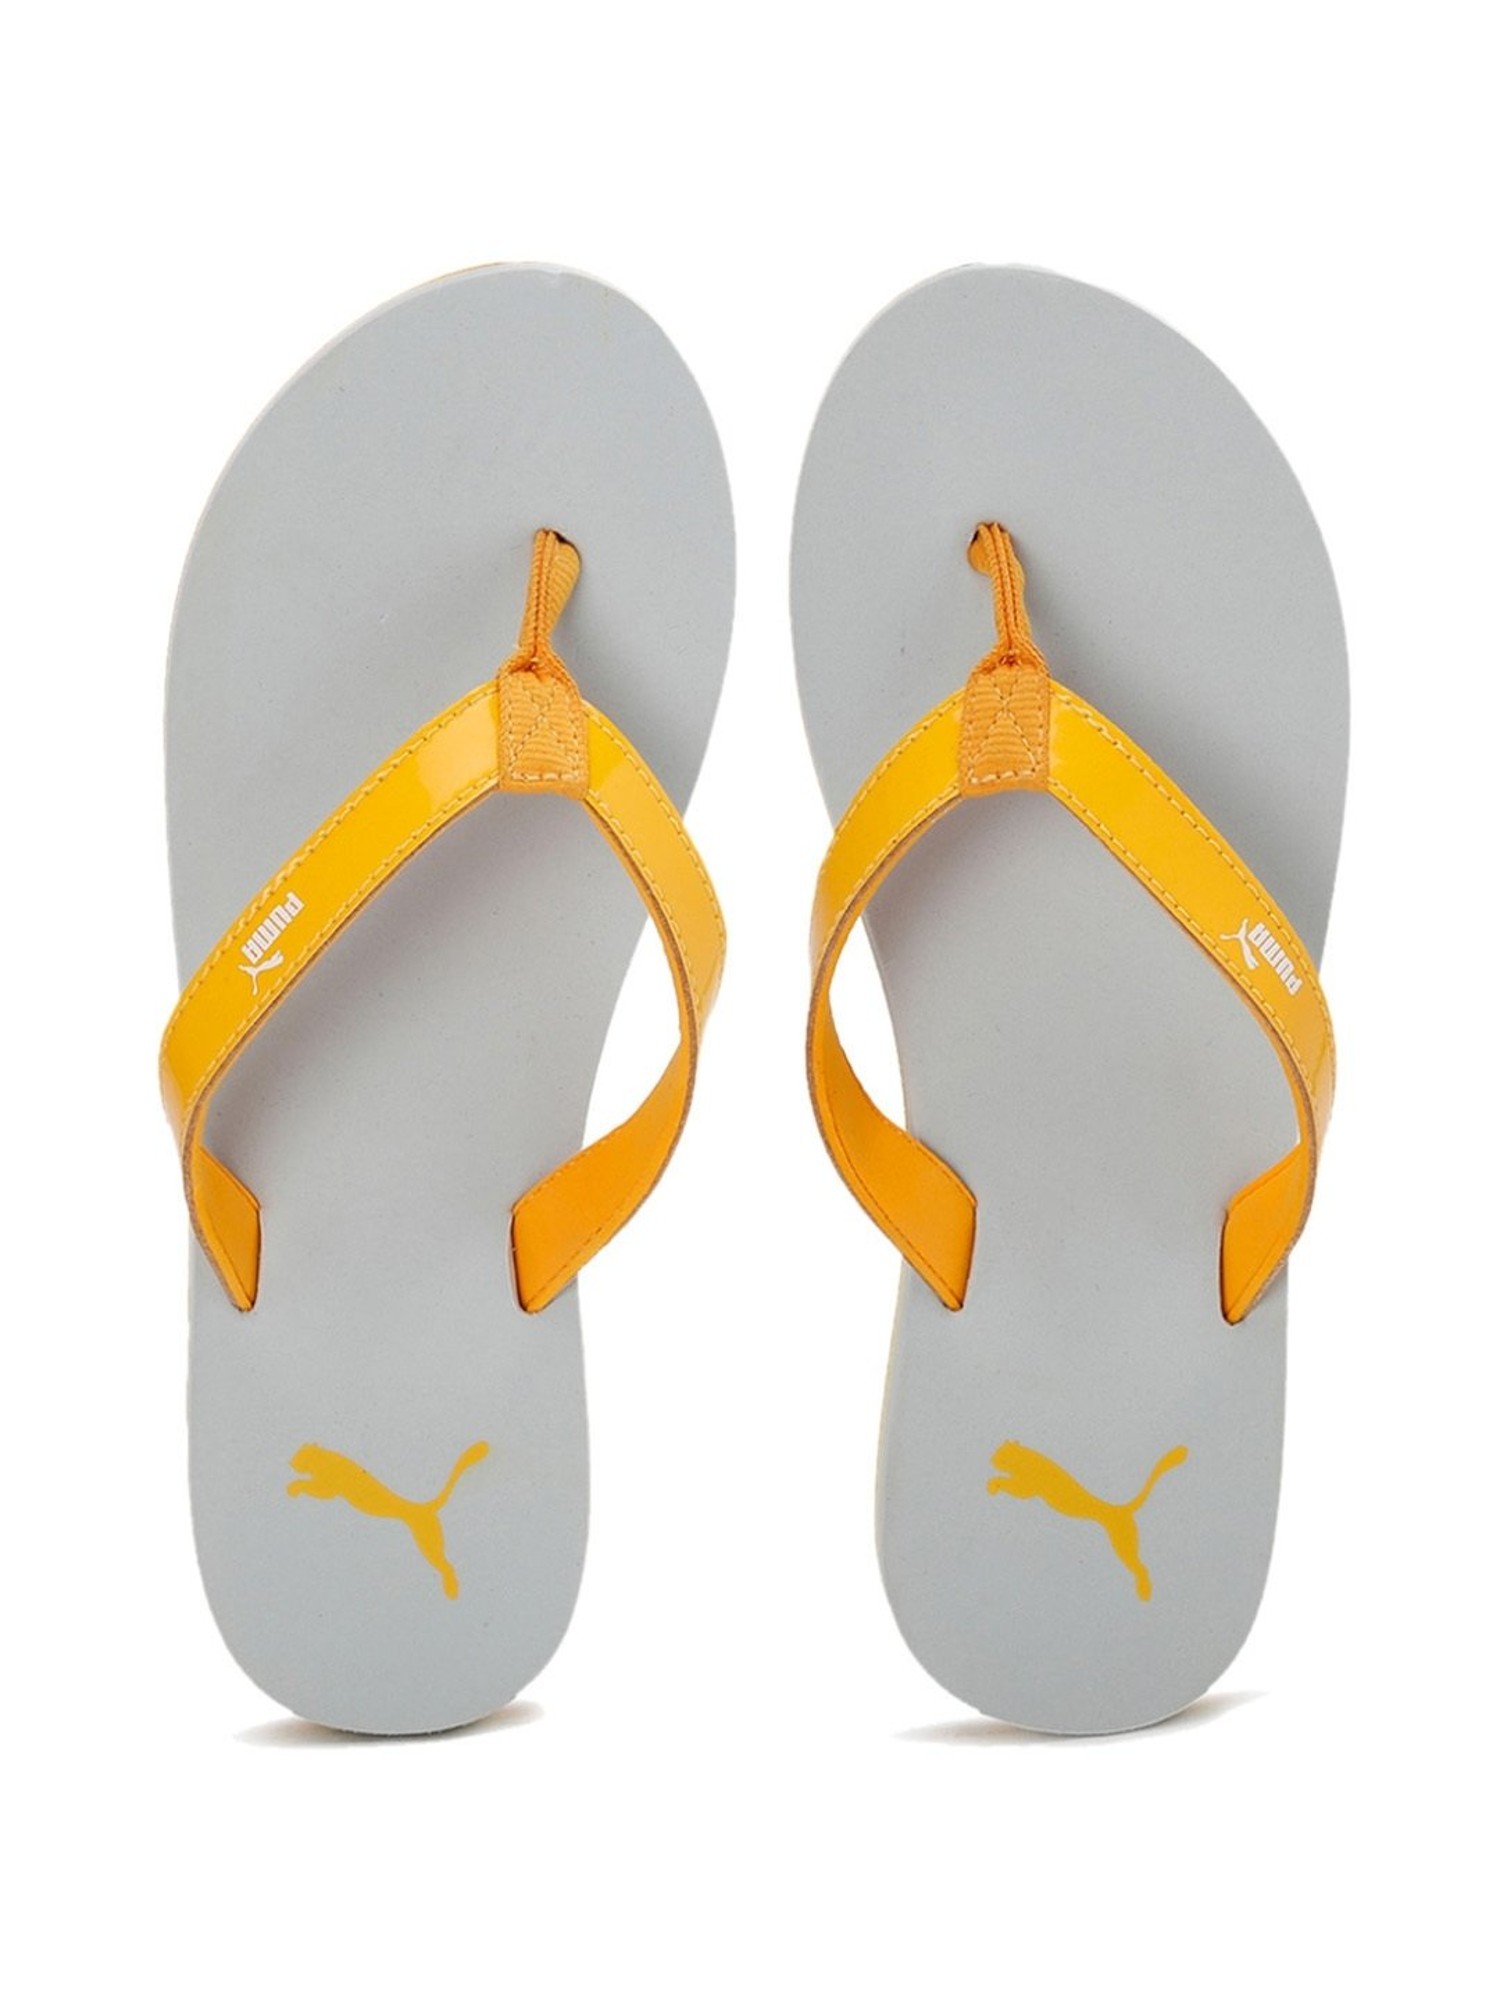 puma slippers men products for sale | eBay-saigonsouth.com.vn